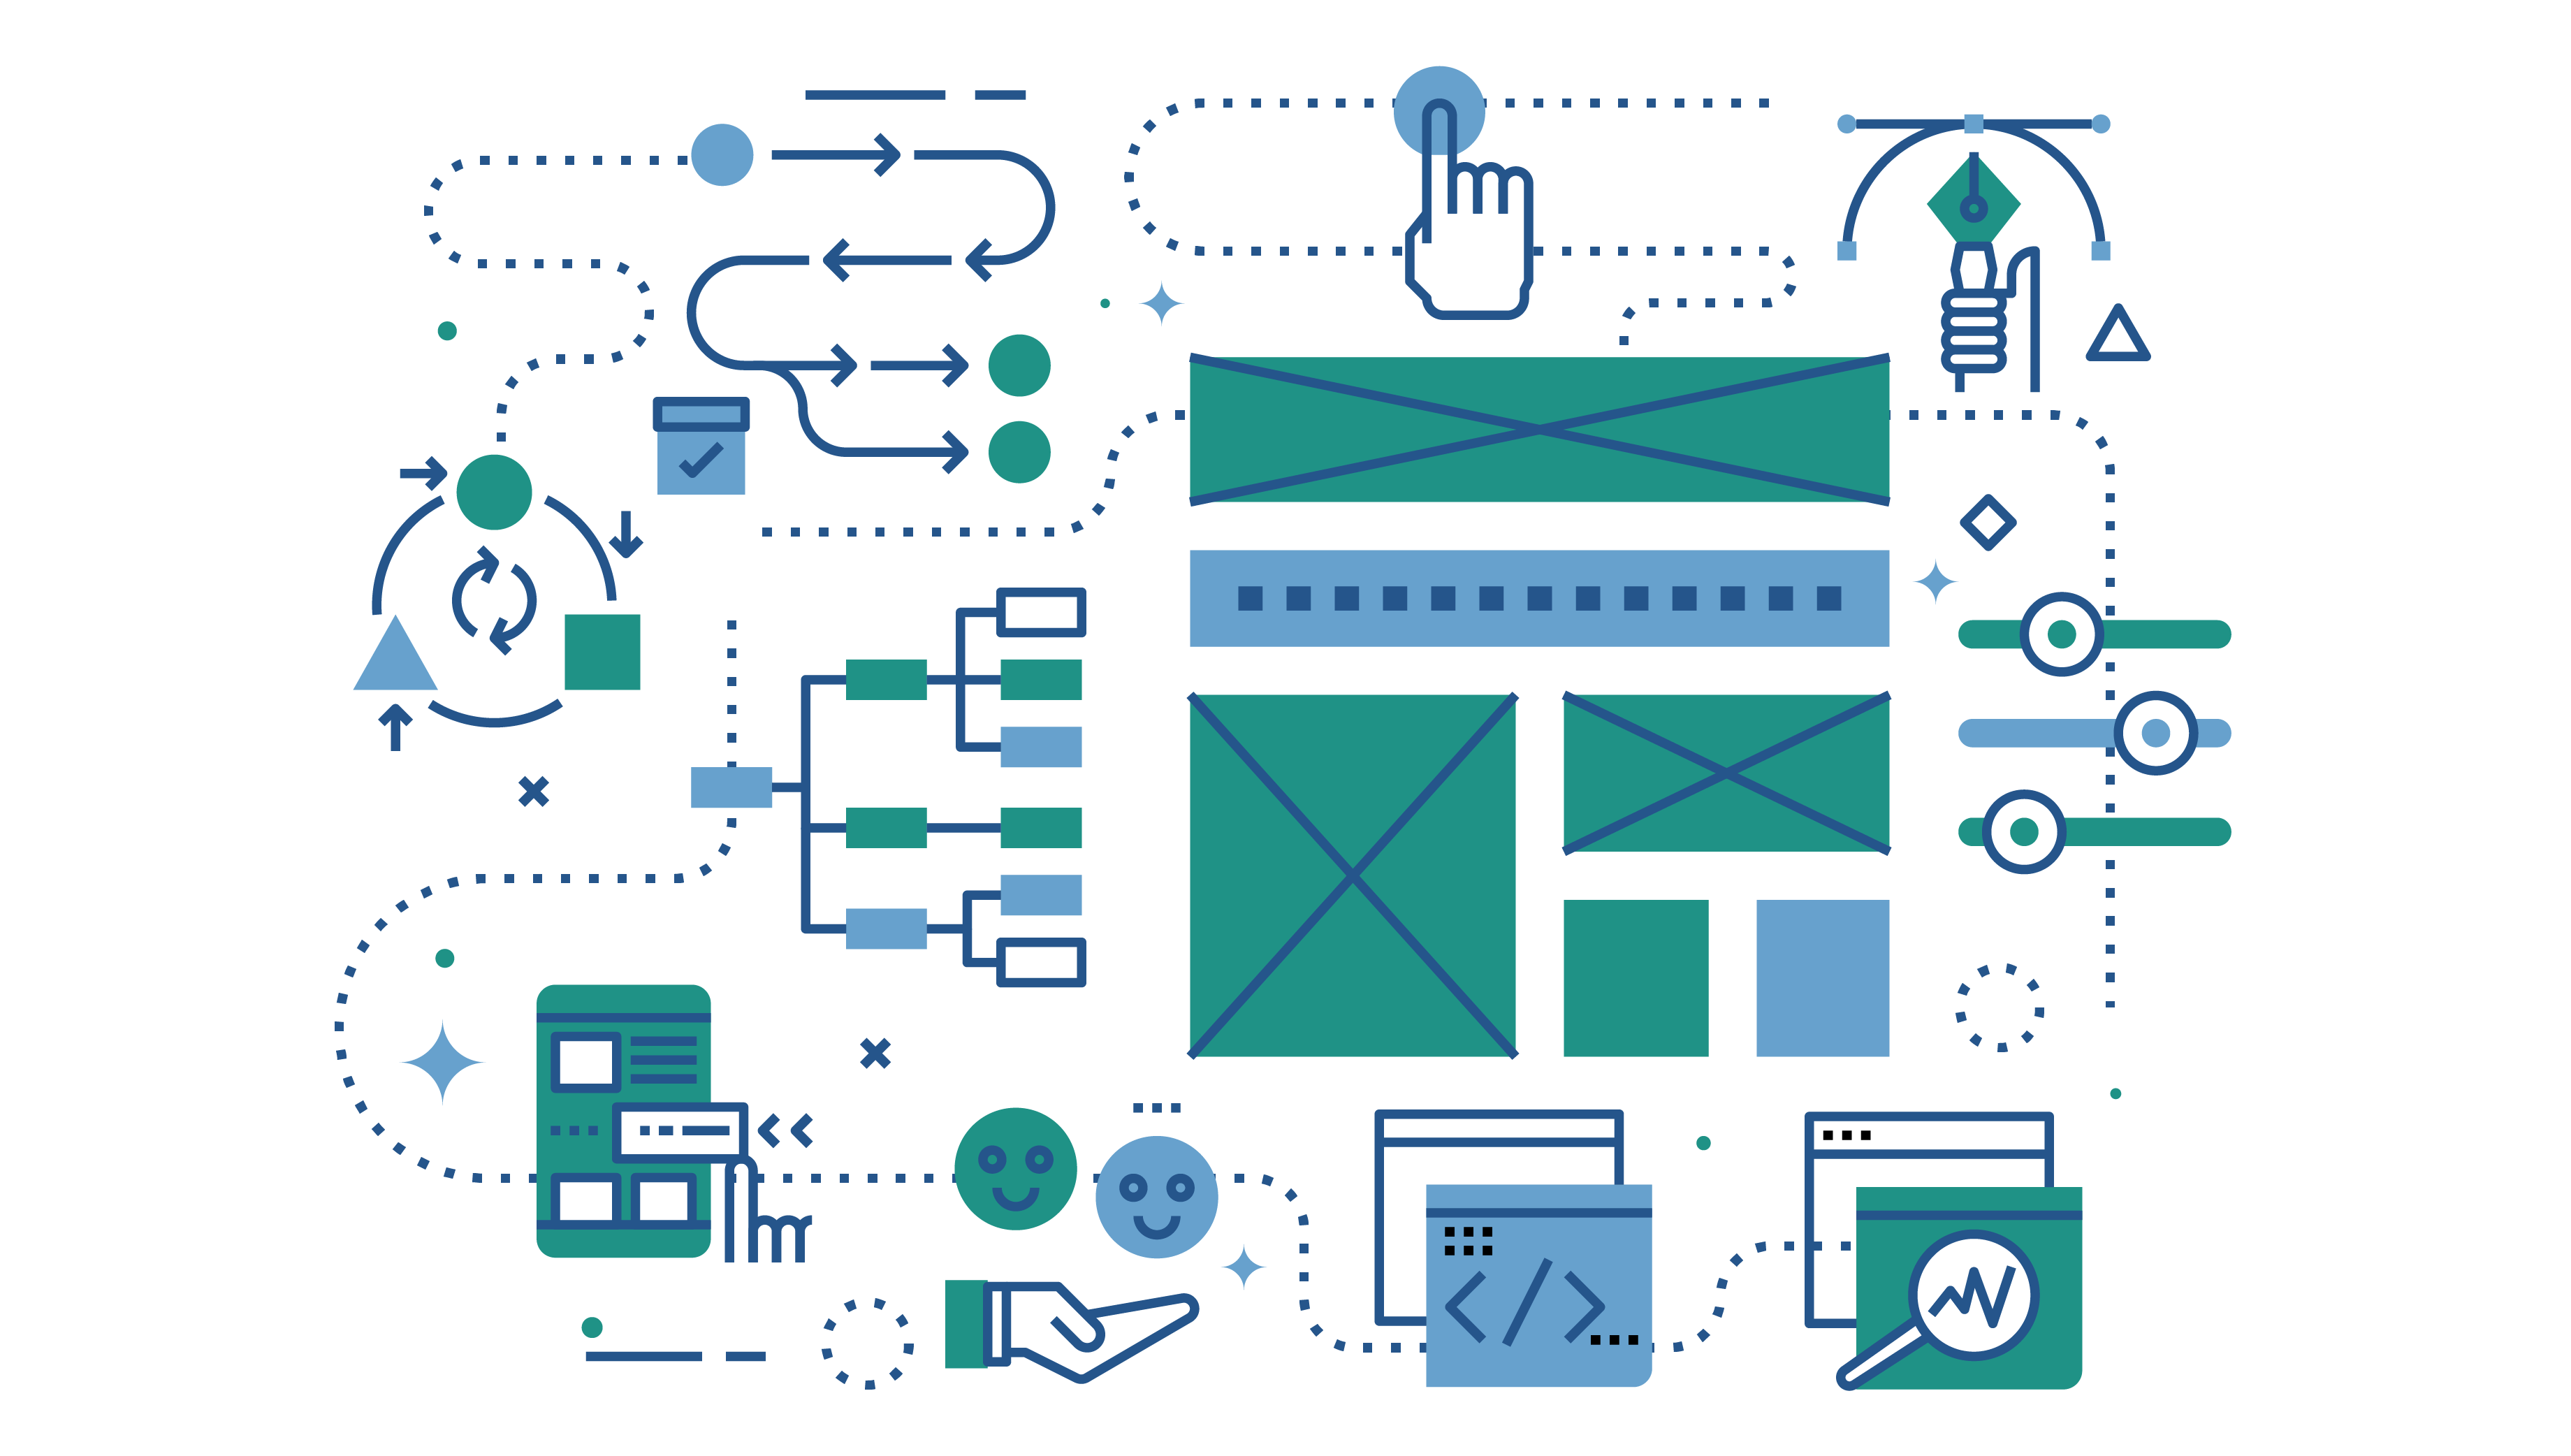 Illustration to Represent Build_Your_Cashback_Vision_with_Datafeeds_APIs in green and blue with lines and connected paths all around)